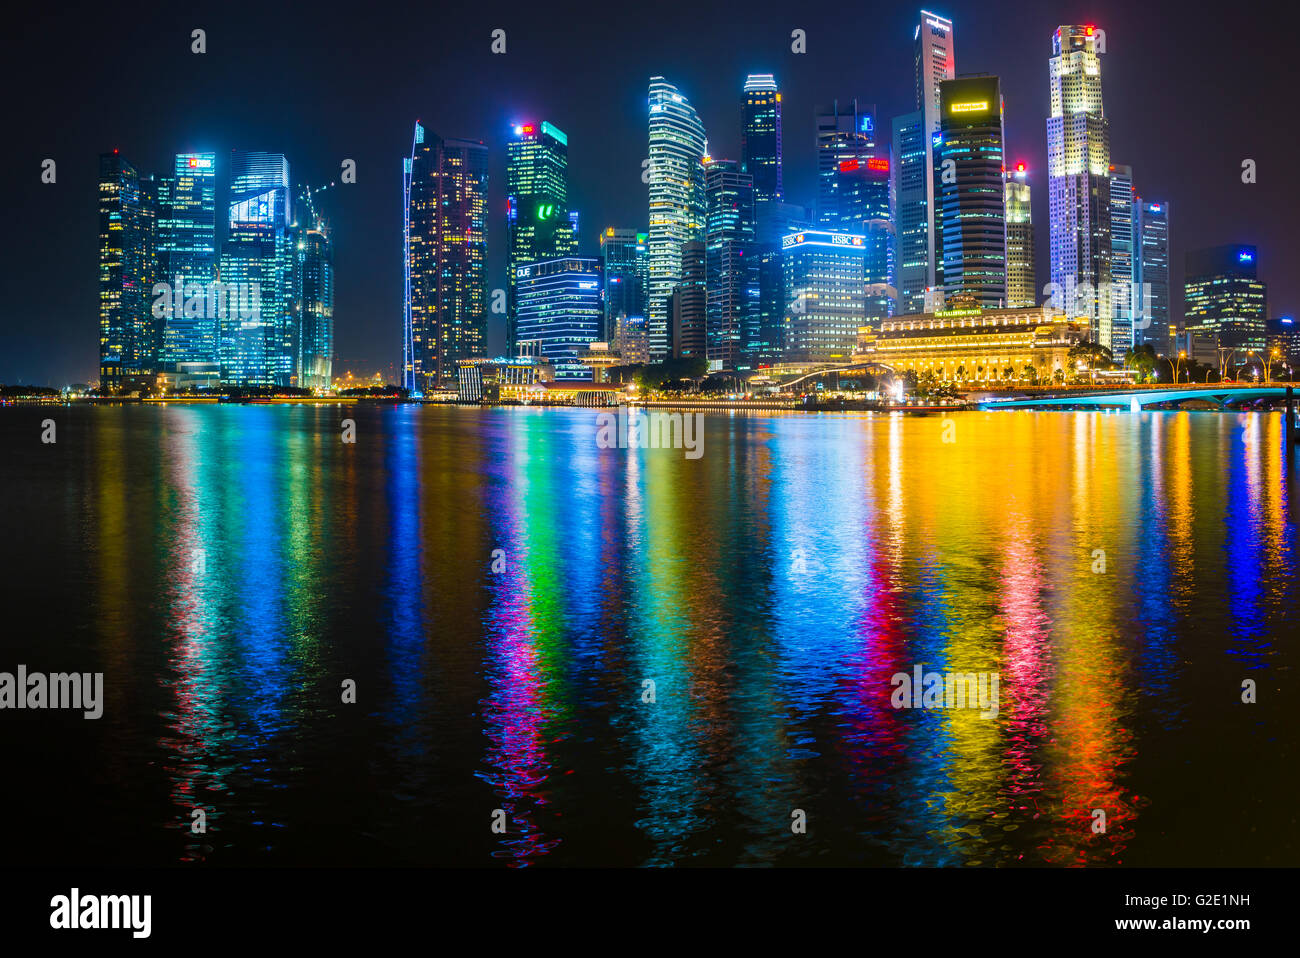 Skyline, Night Scene, Downtown, Financial District, Central Business District, Marina Bay, Downtown Core, Singapore Stock Photo